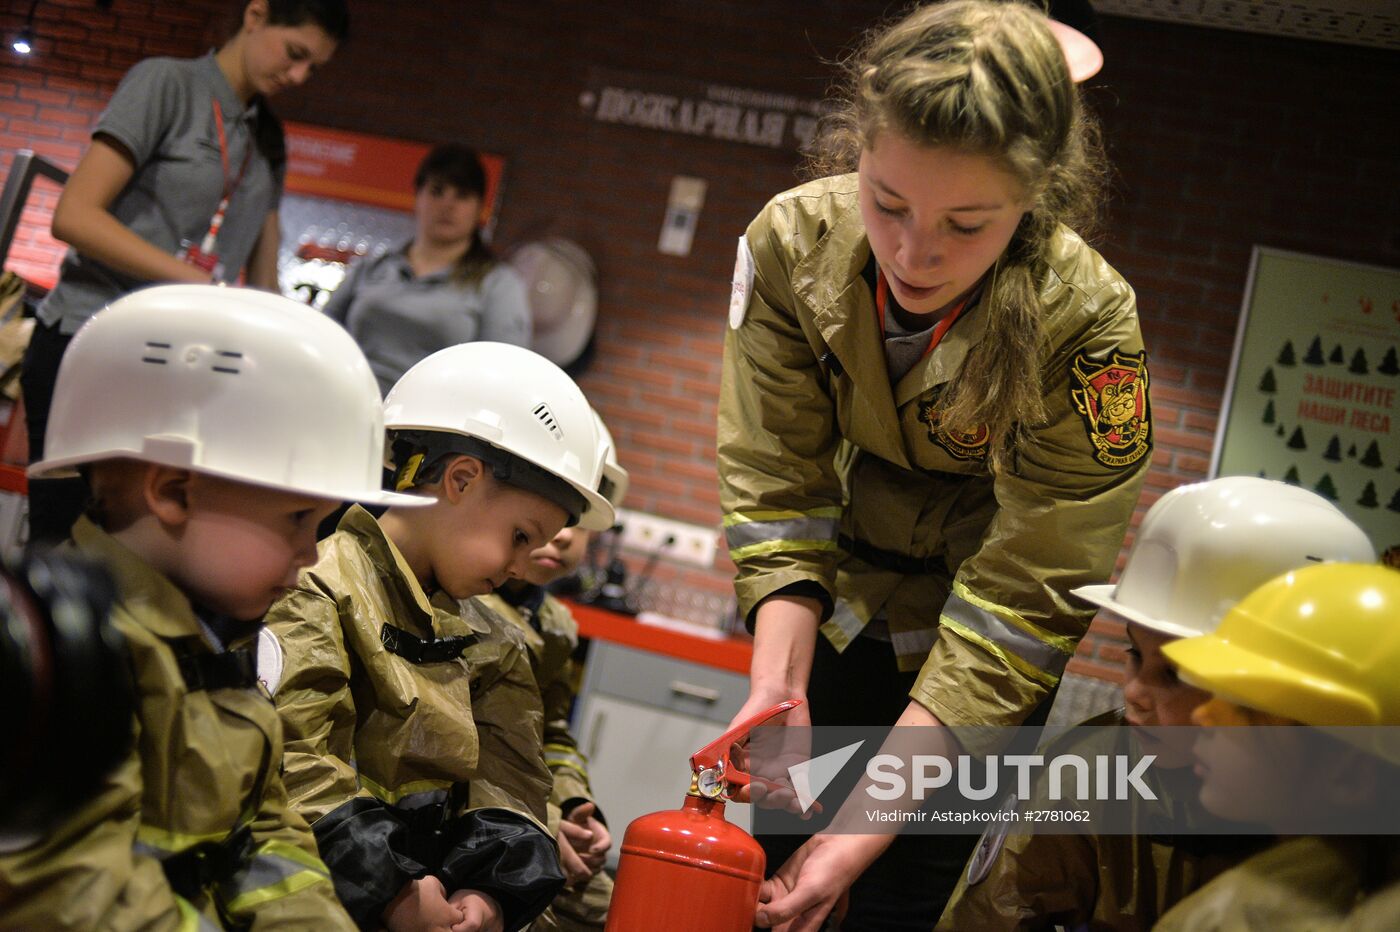 Kidzania game training park opens in Moscow